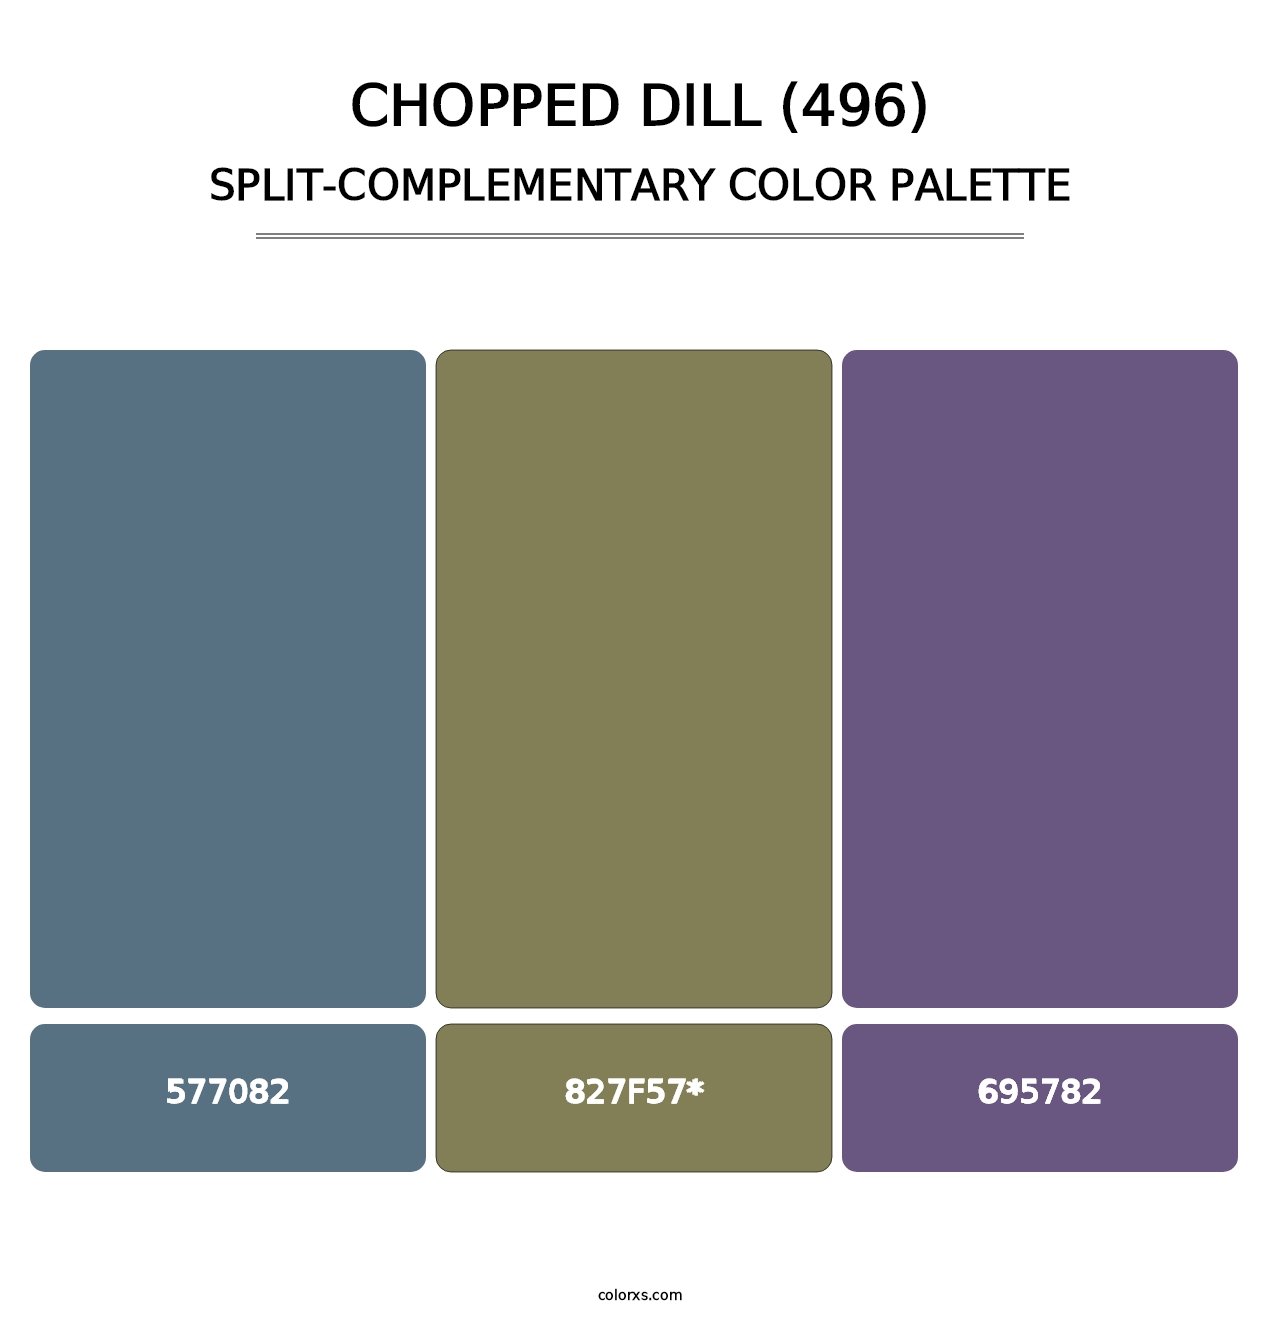 Chopped Dill (496) - Split-Complementary Color Palette